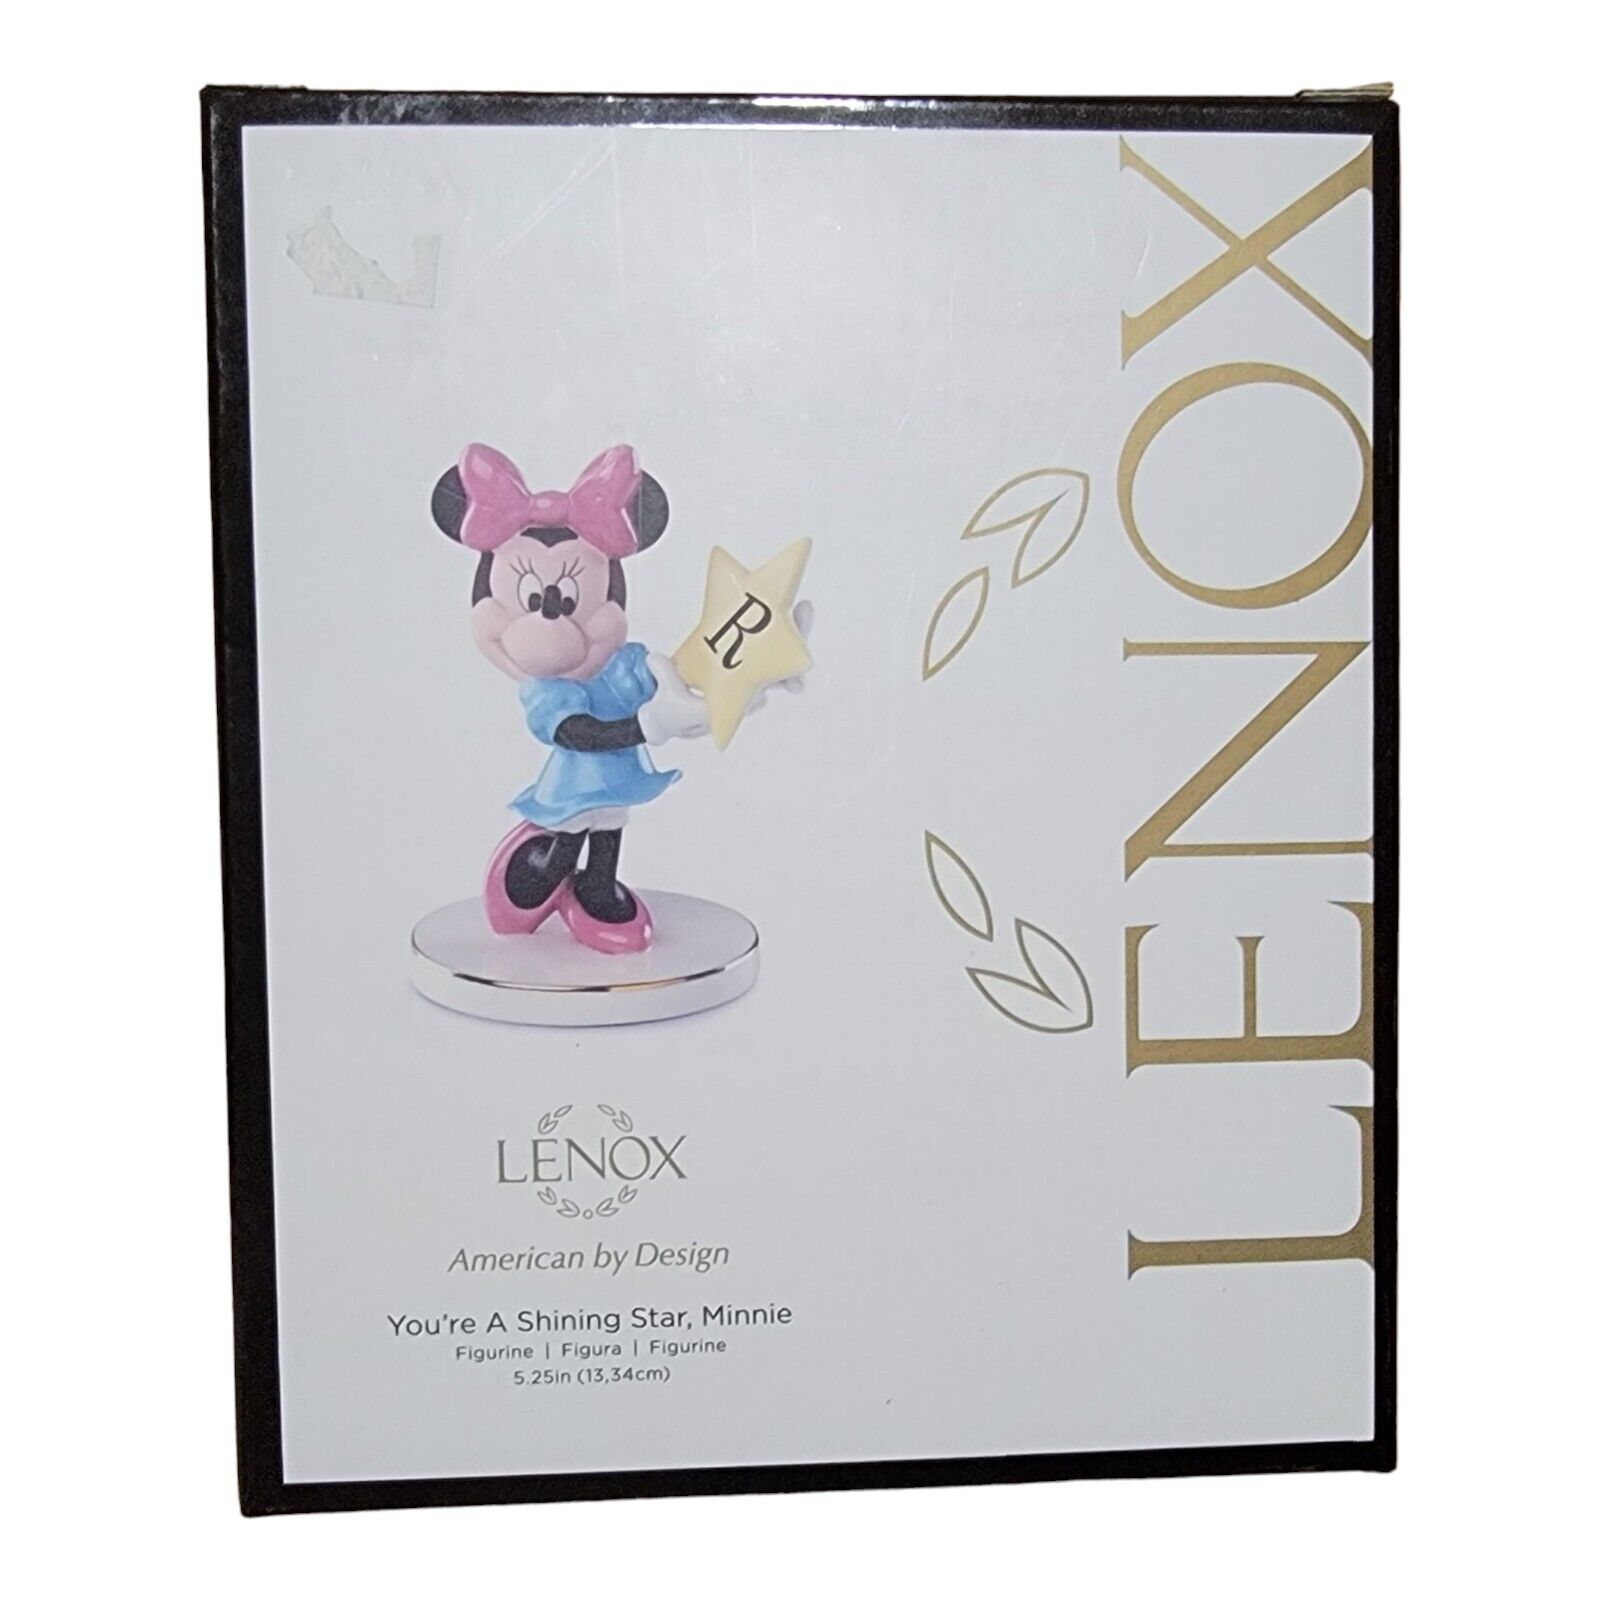 New Lenox Disney You're A Shining Star Minnie Mouse Figurine American by Design